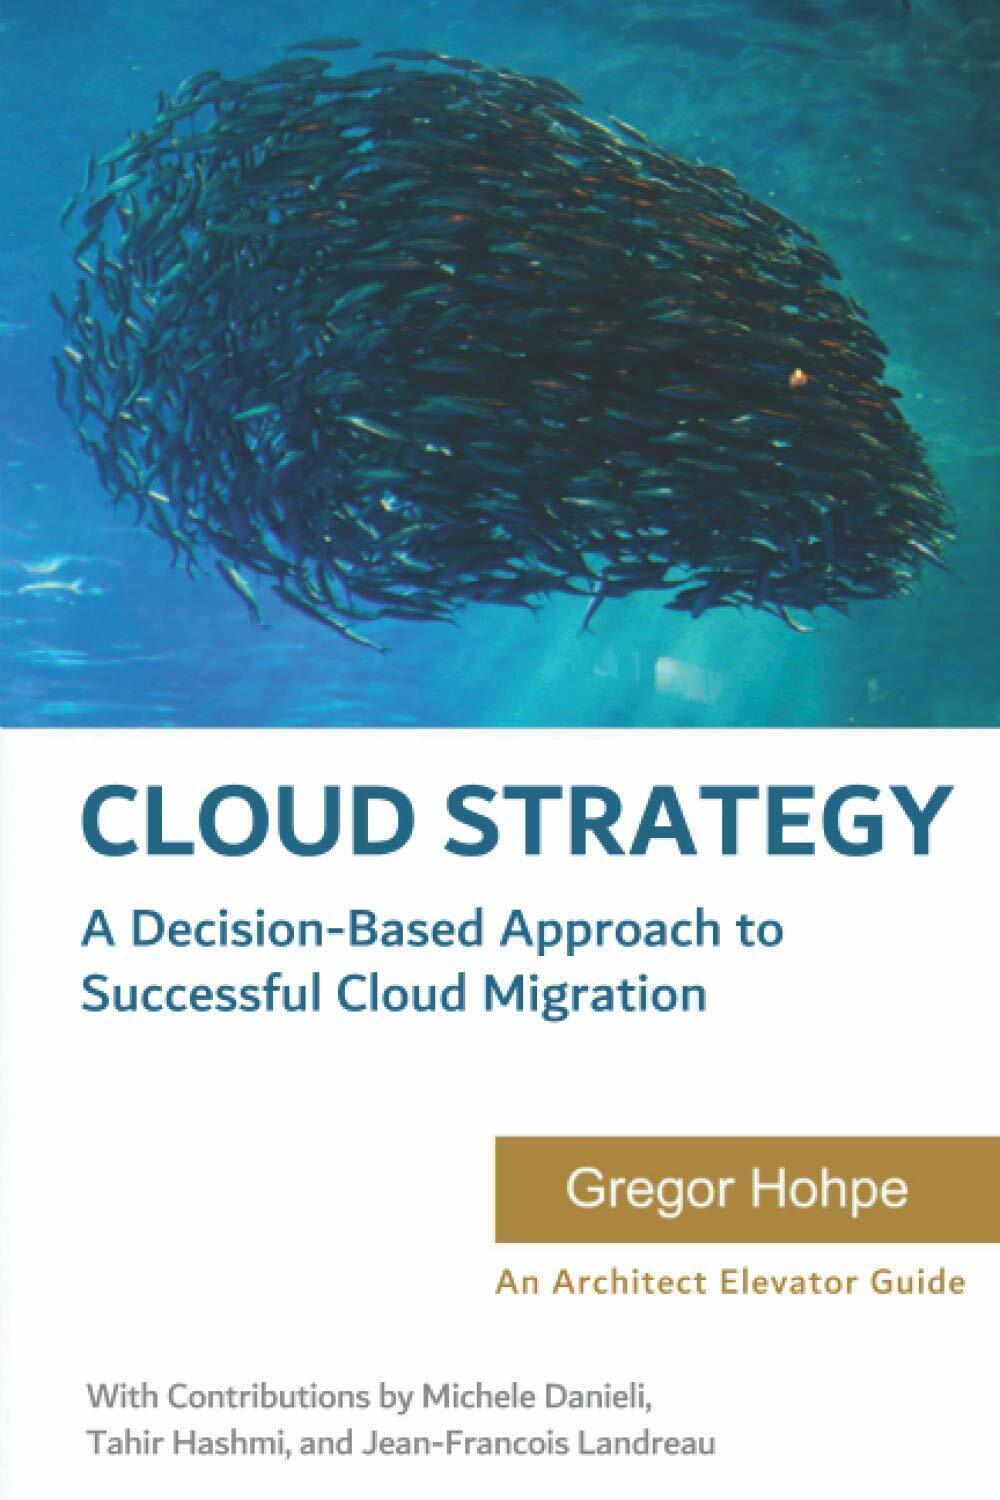 Cloud Strategy A Decision-Based Approach to Successful Cloud Migration di Gregor libro usato